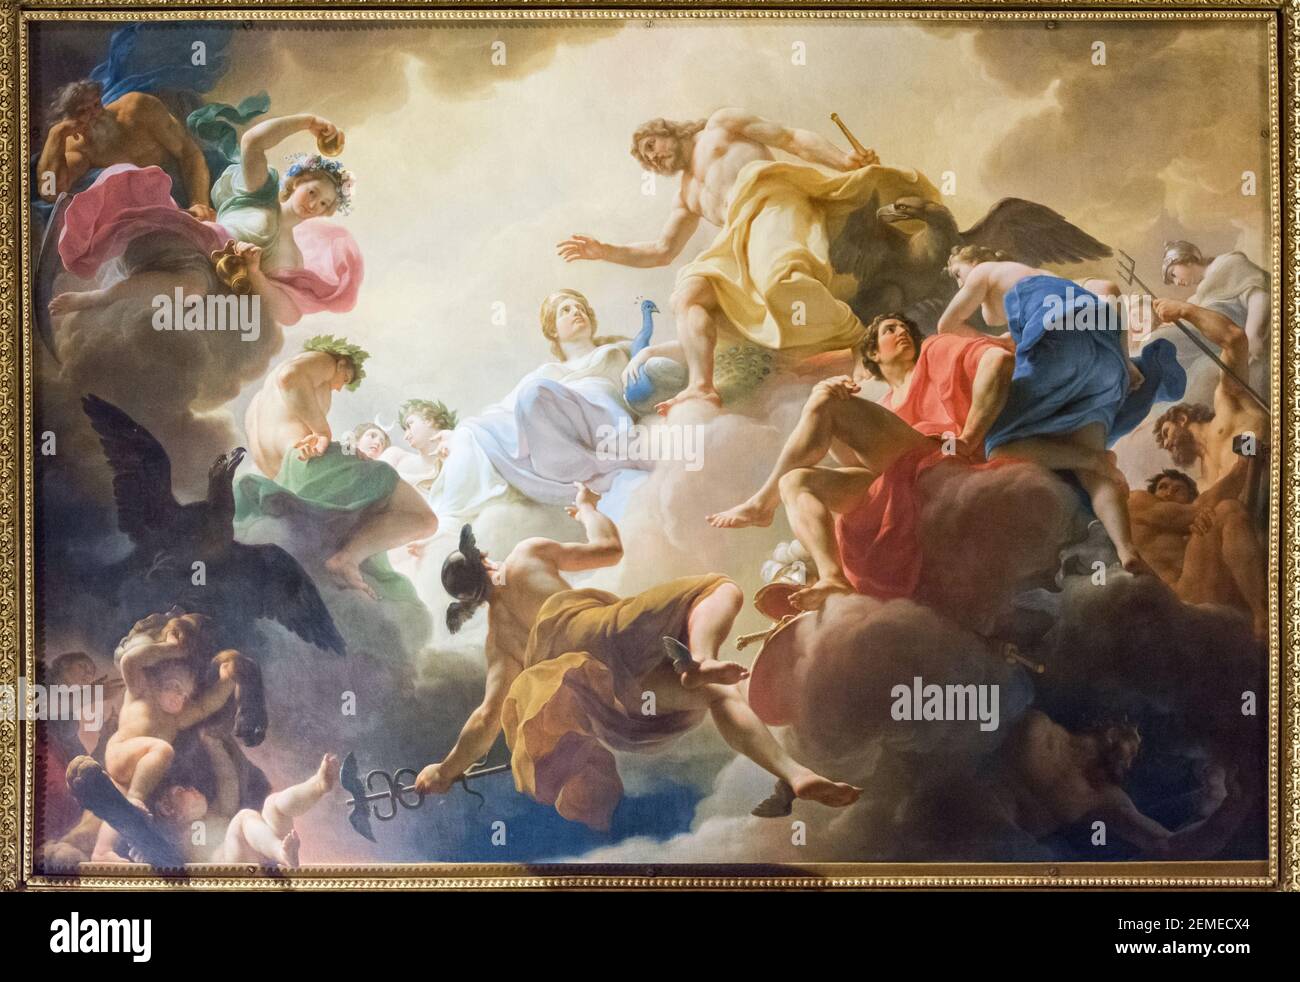 Rome, Italy - Oct 05, 2018: Painting on the ceiling of the Borghese Gallery, Rome Stock Photo